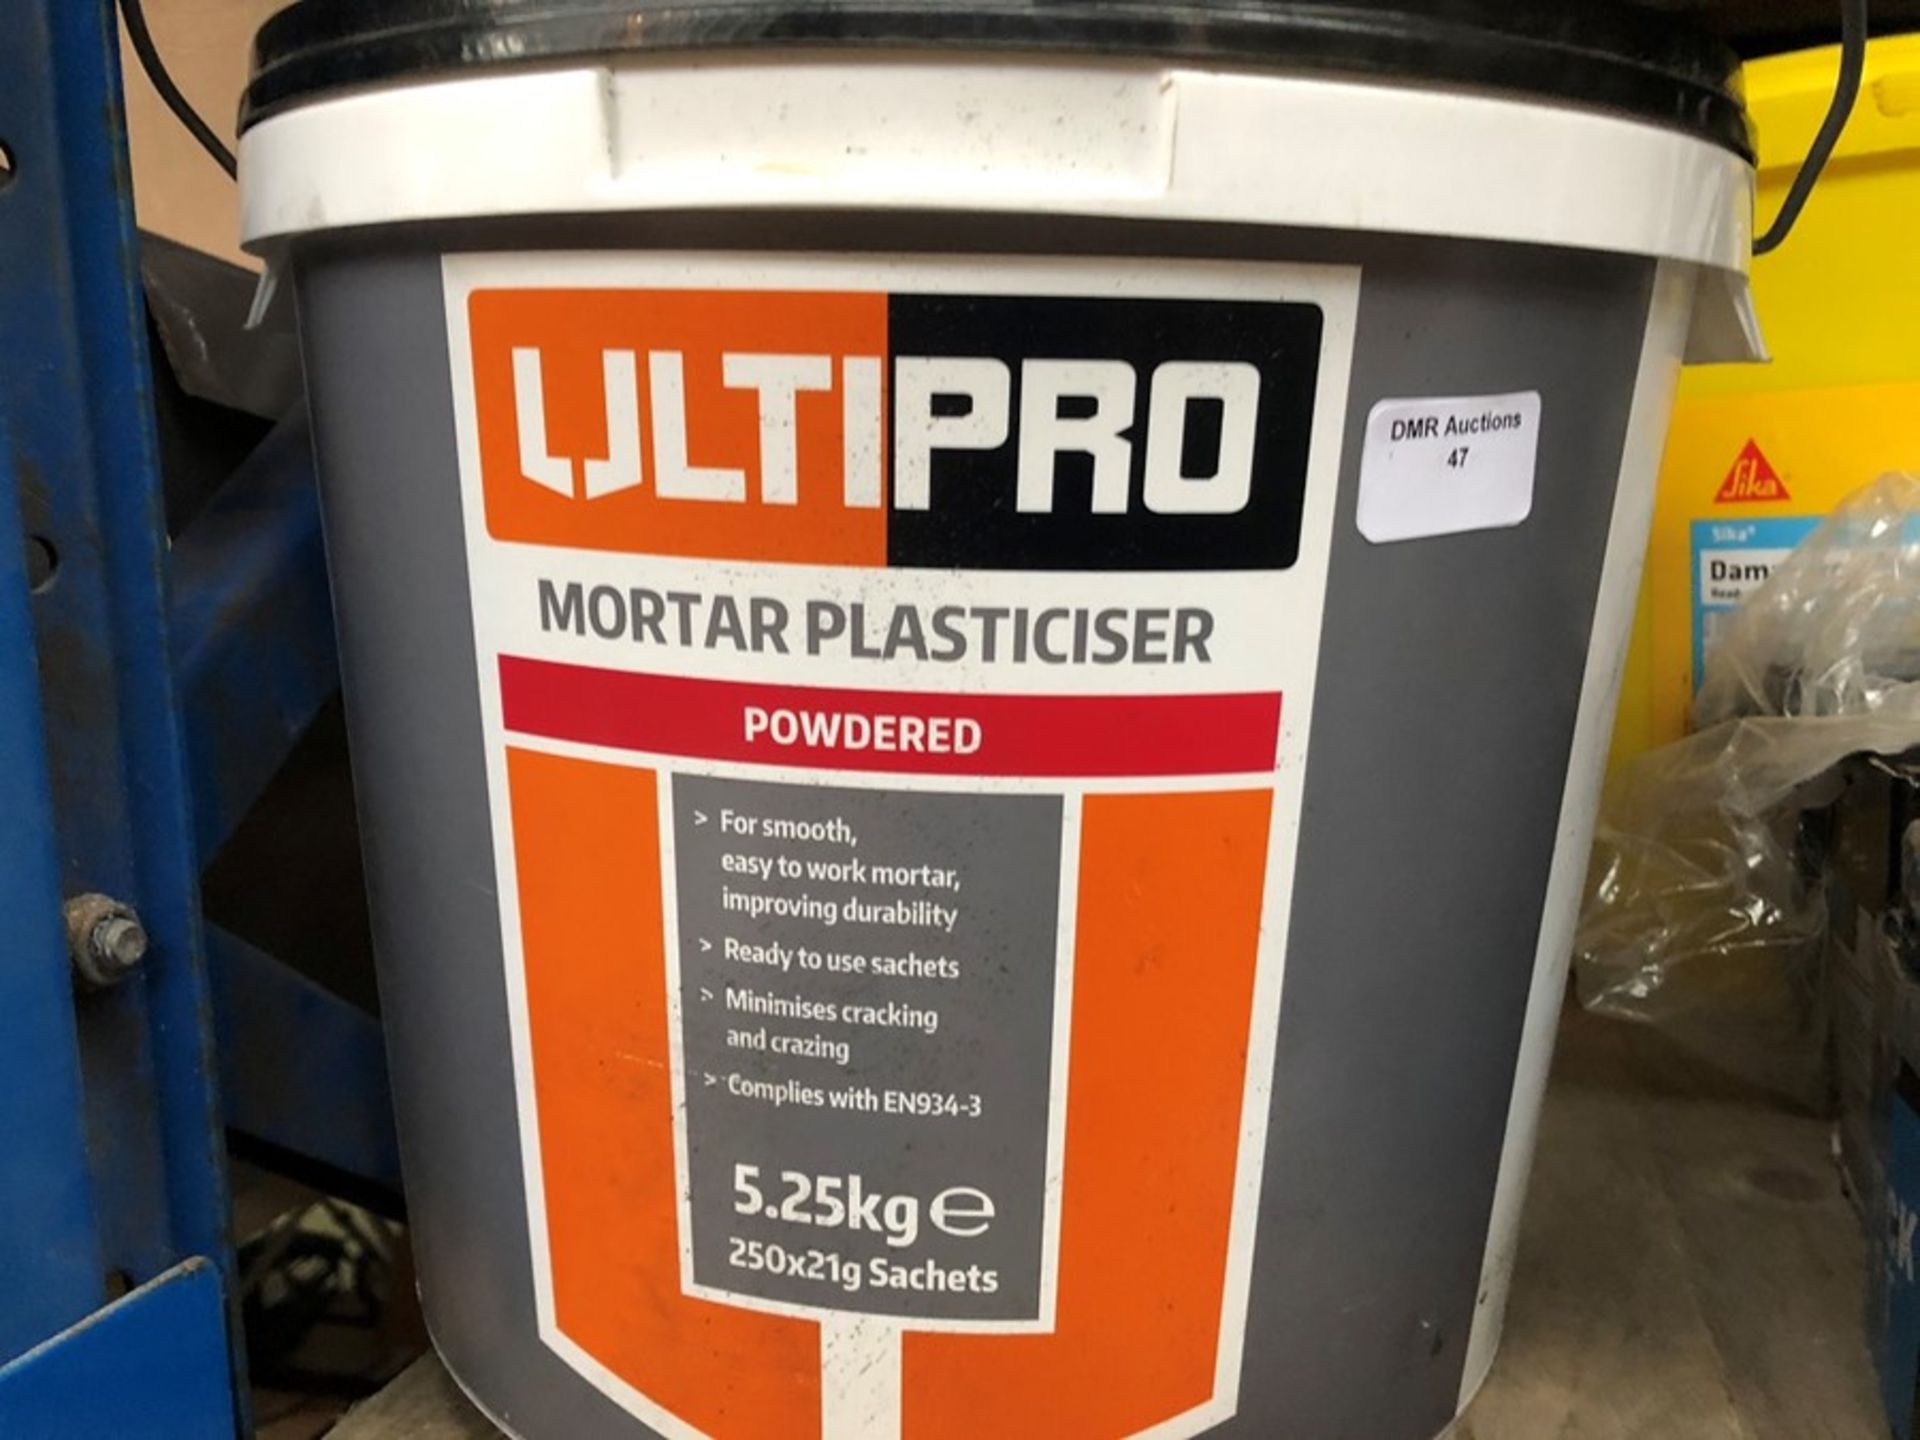 1 BOX TUB OF ULTIPRO MORTAR PLASTICISER - POWDERED / PN - 785 (PUBLIC VIEWING AVAILABLE)